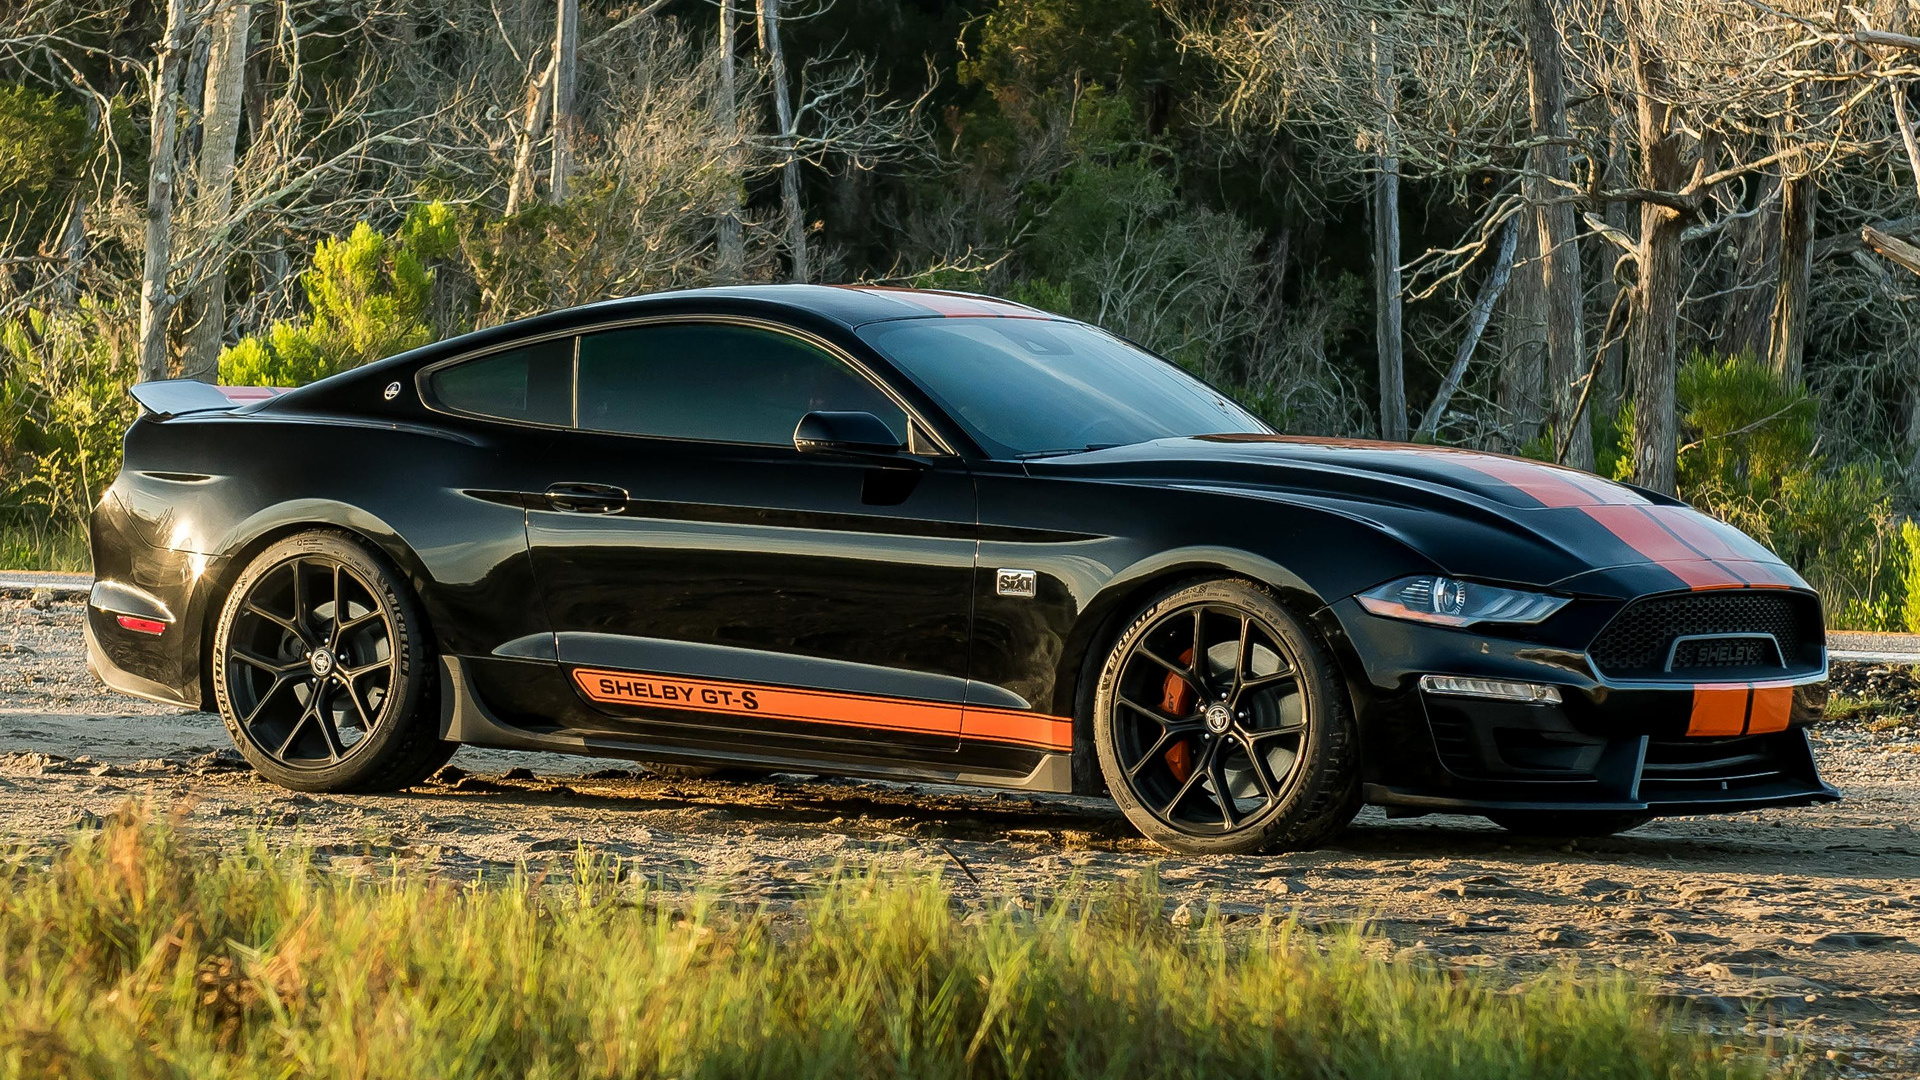 Mustang Of The Day: 2019 Ford Mustang Shelby GT-S